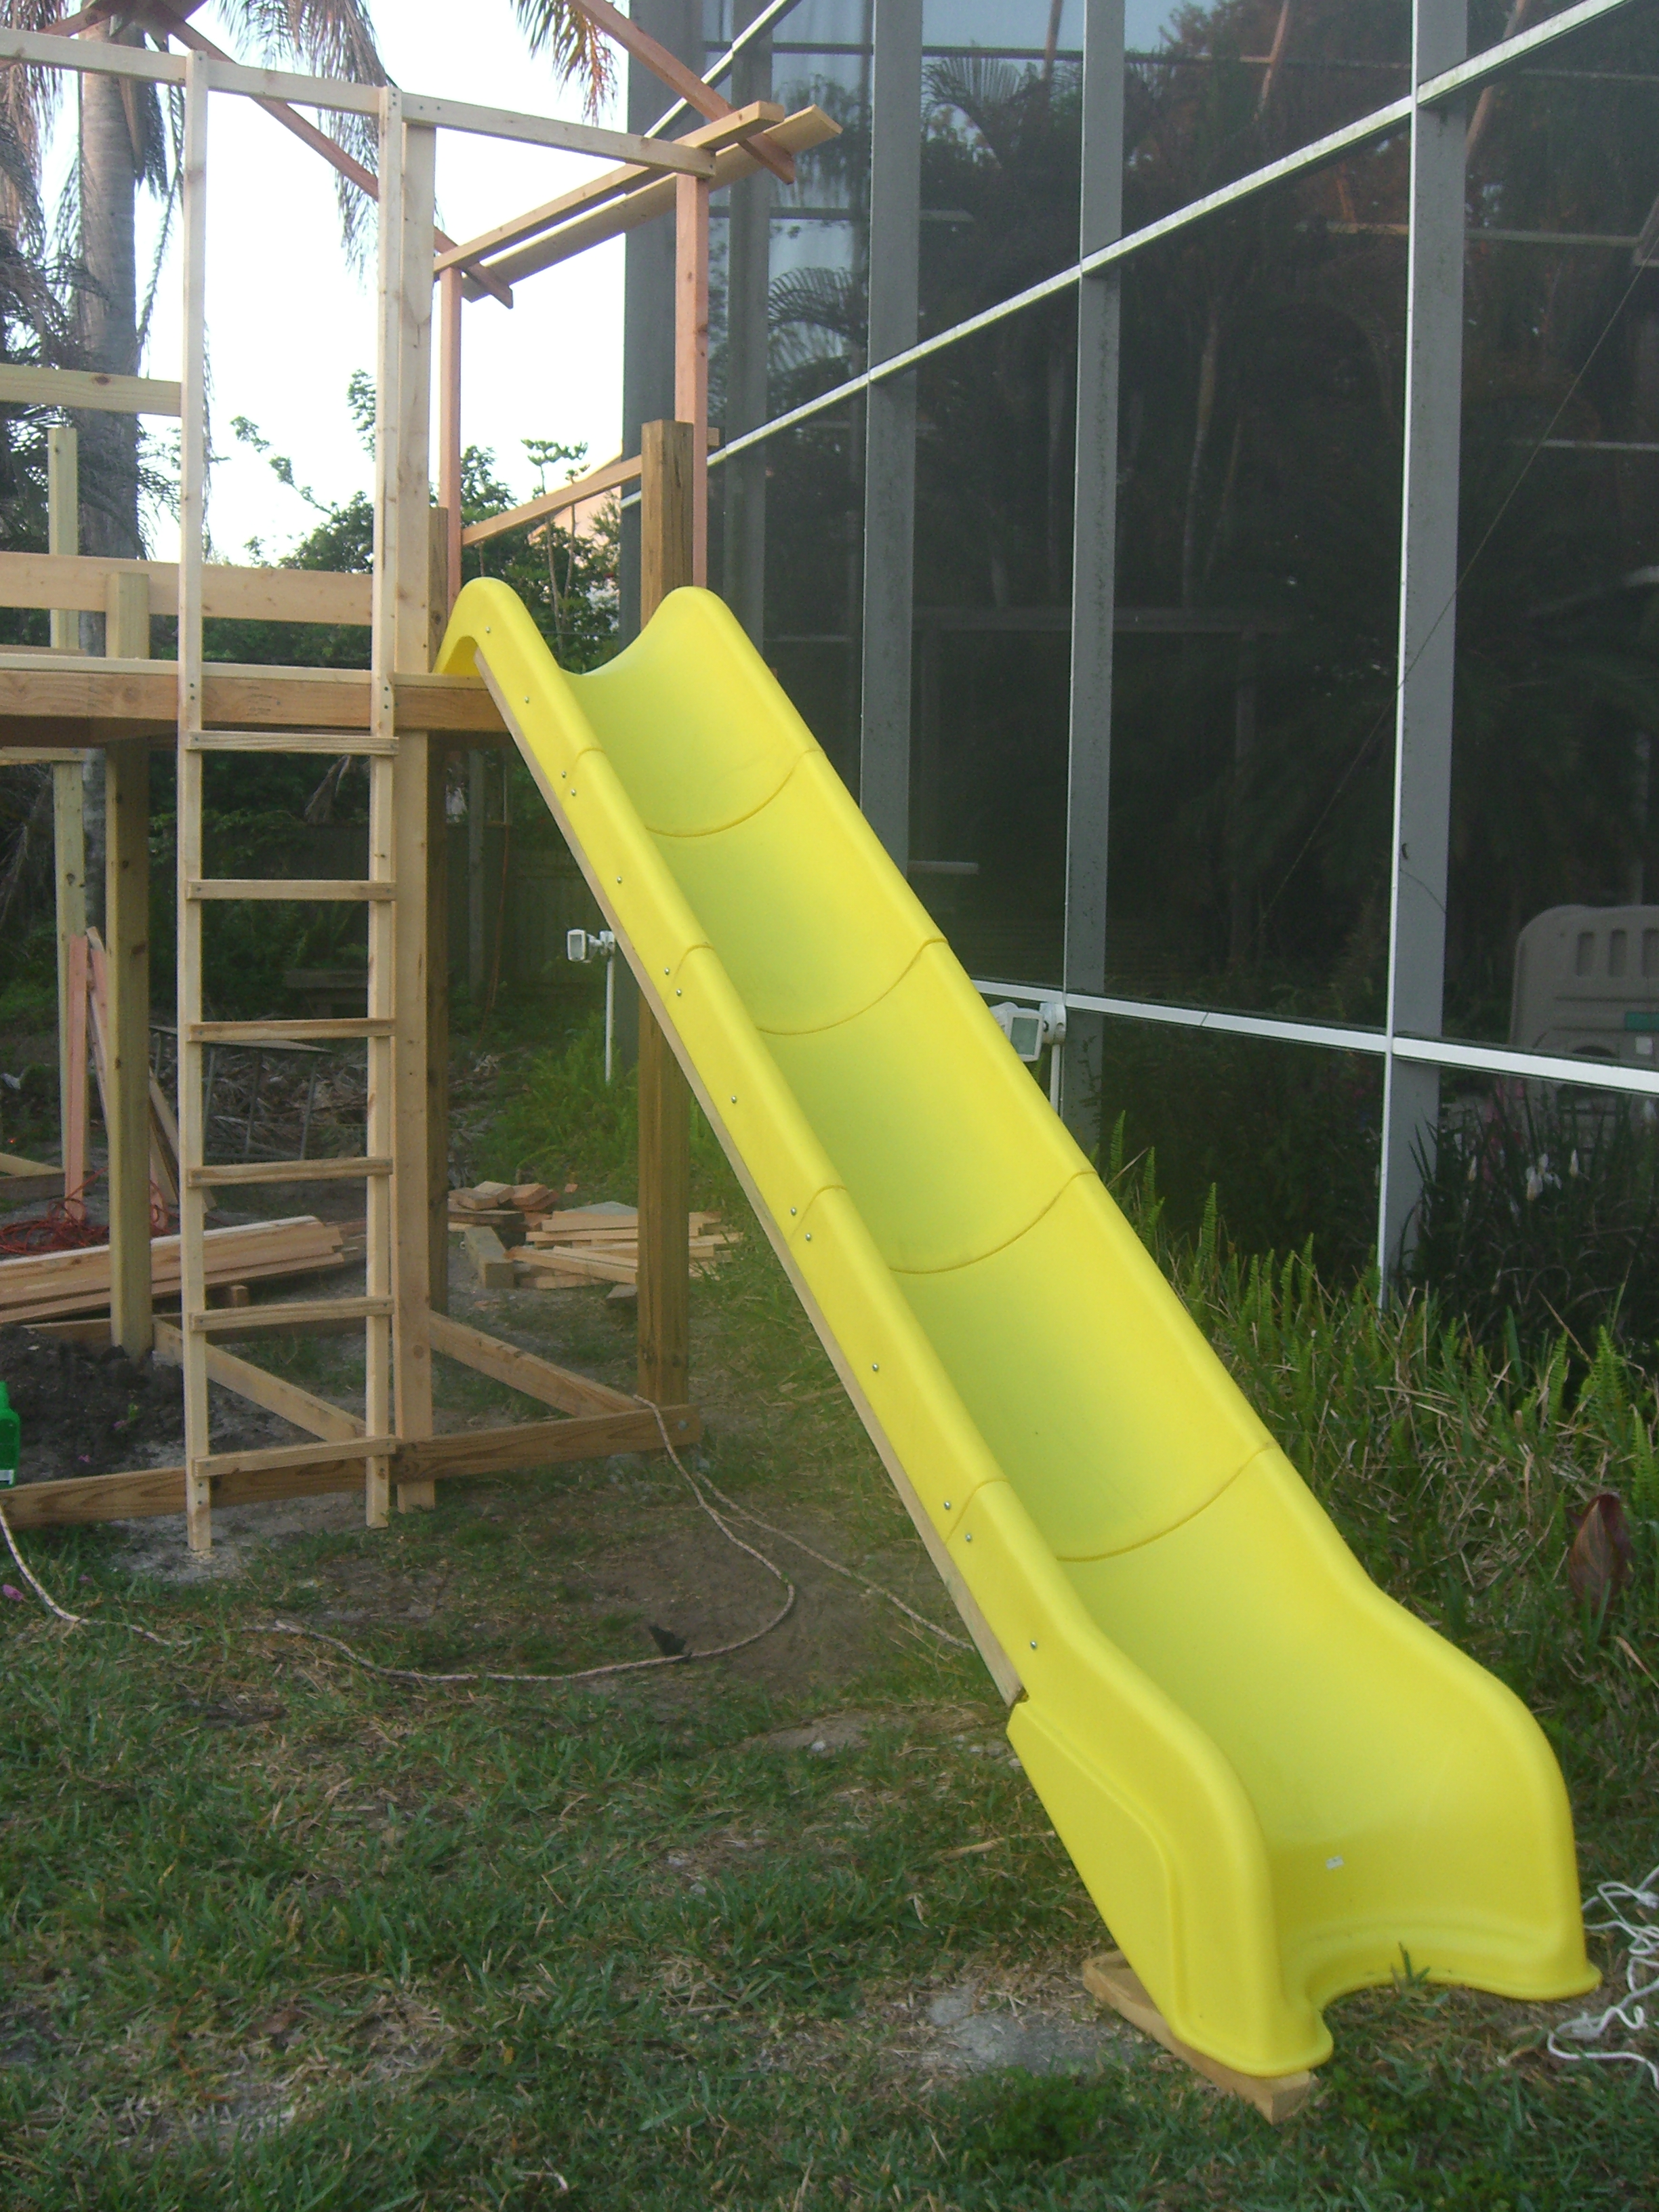 Got a good deal on the slide from an internet playset hardware supplier. It was slightly 'damaged'. I could find nothing wrong with it.